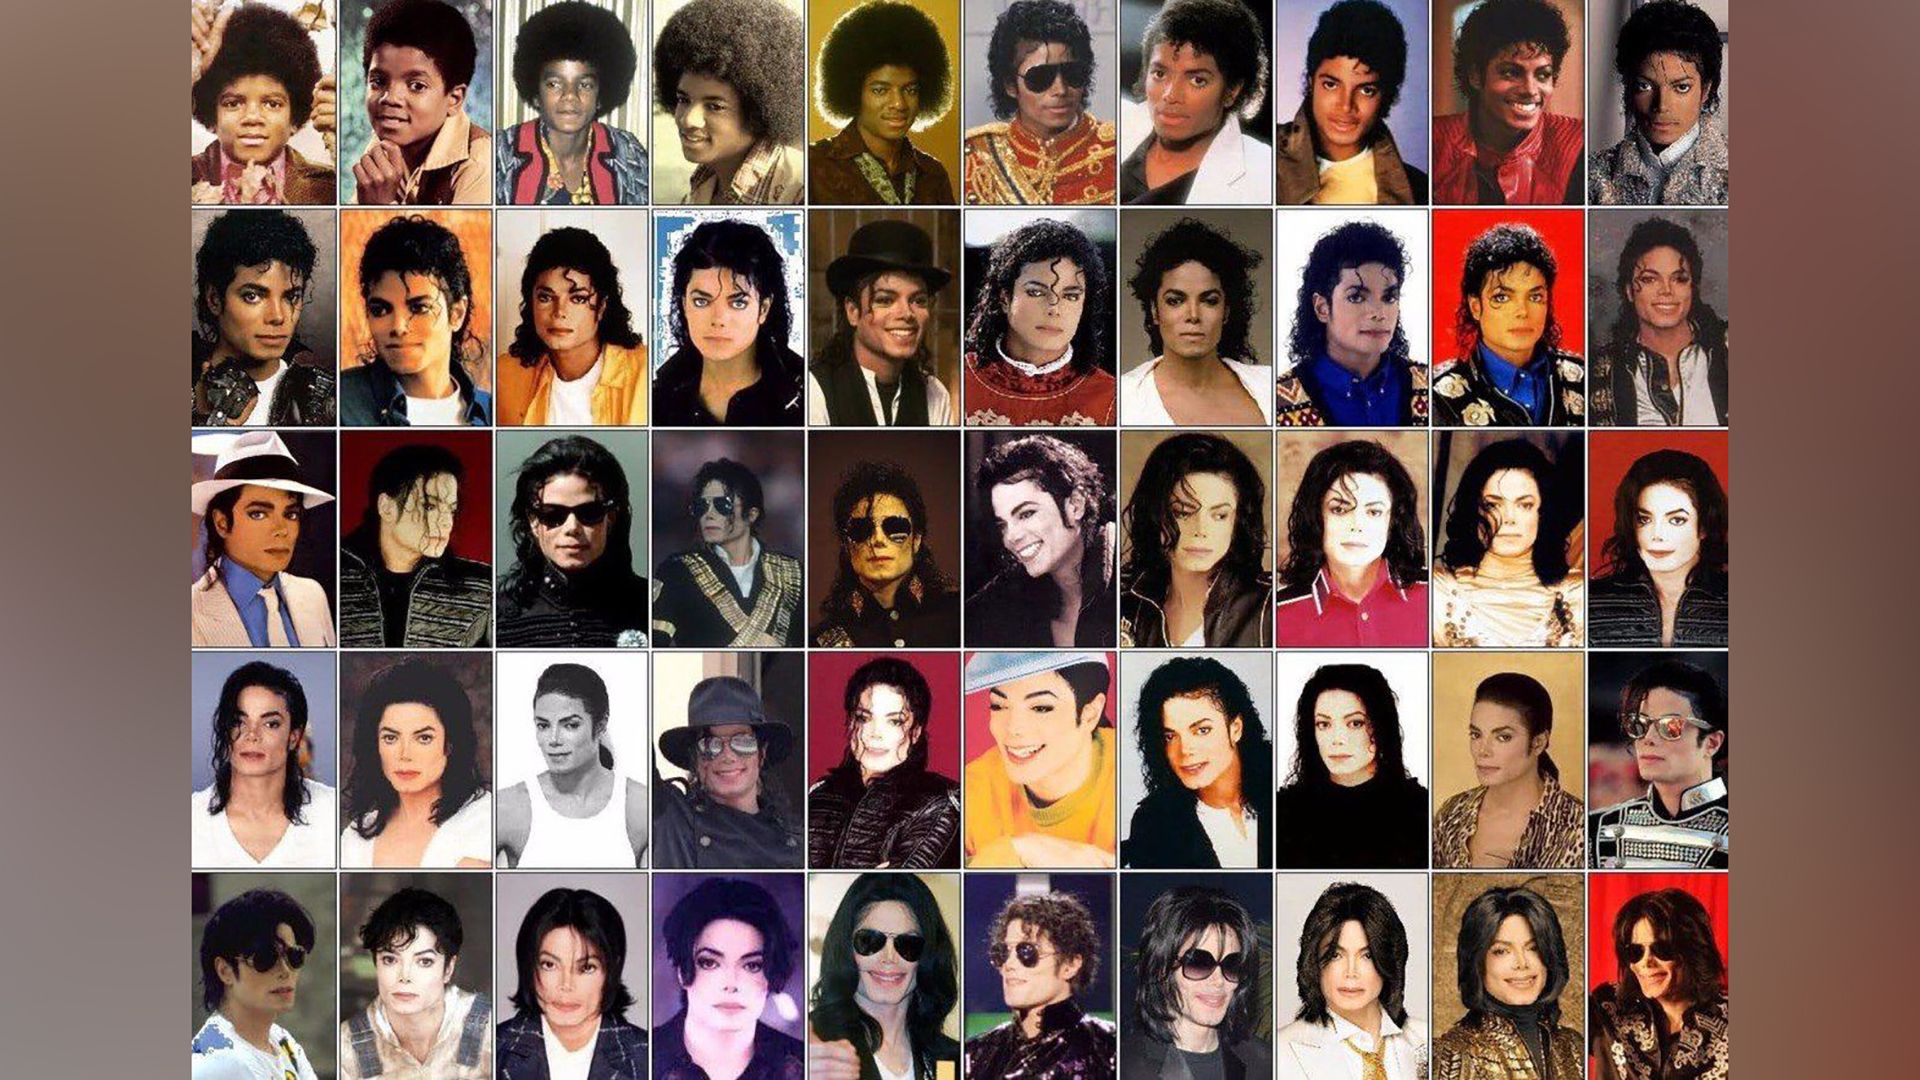 All Michael Jackson's stage images in one picture